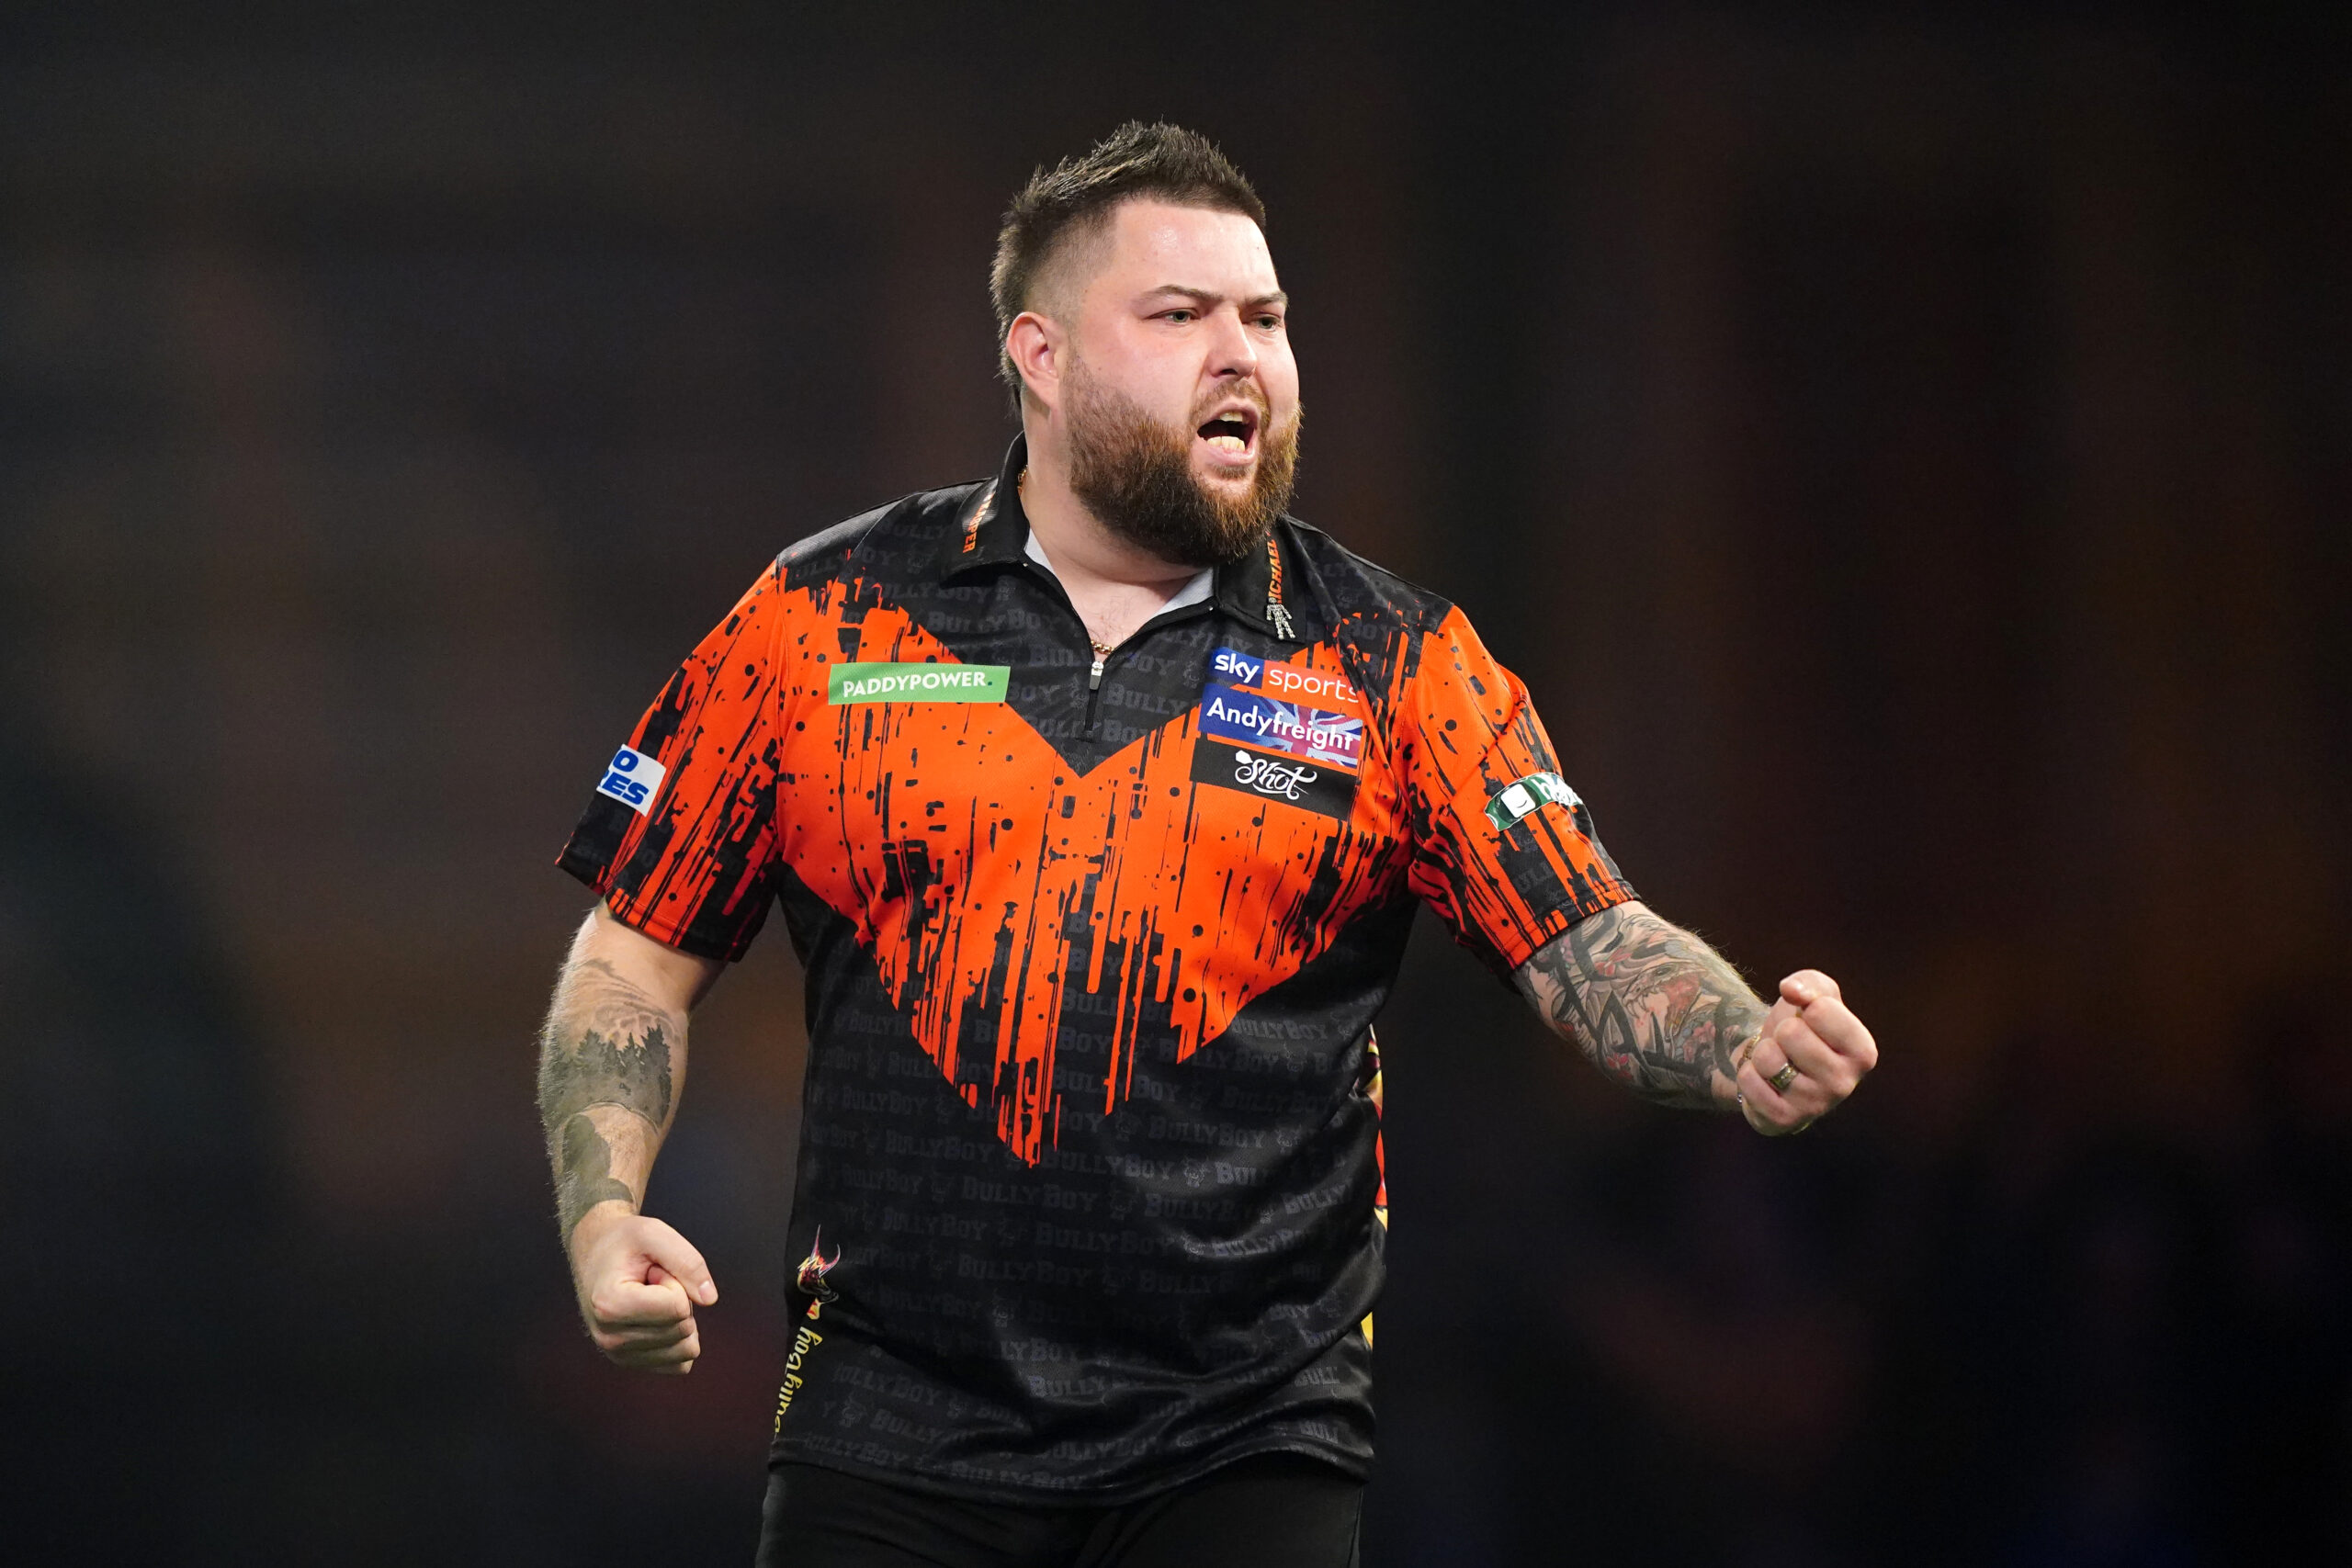 Darts-Weltmeister Michael Smith